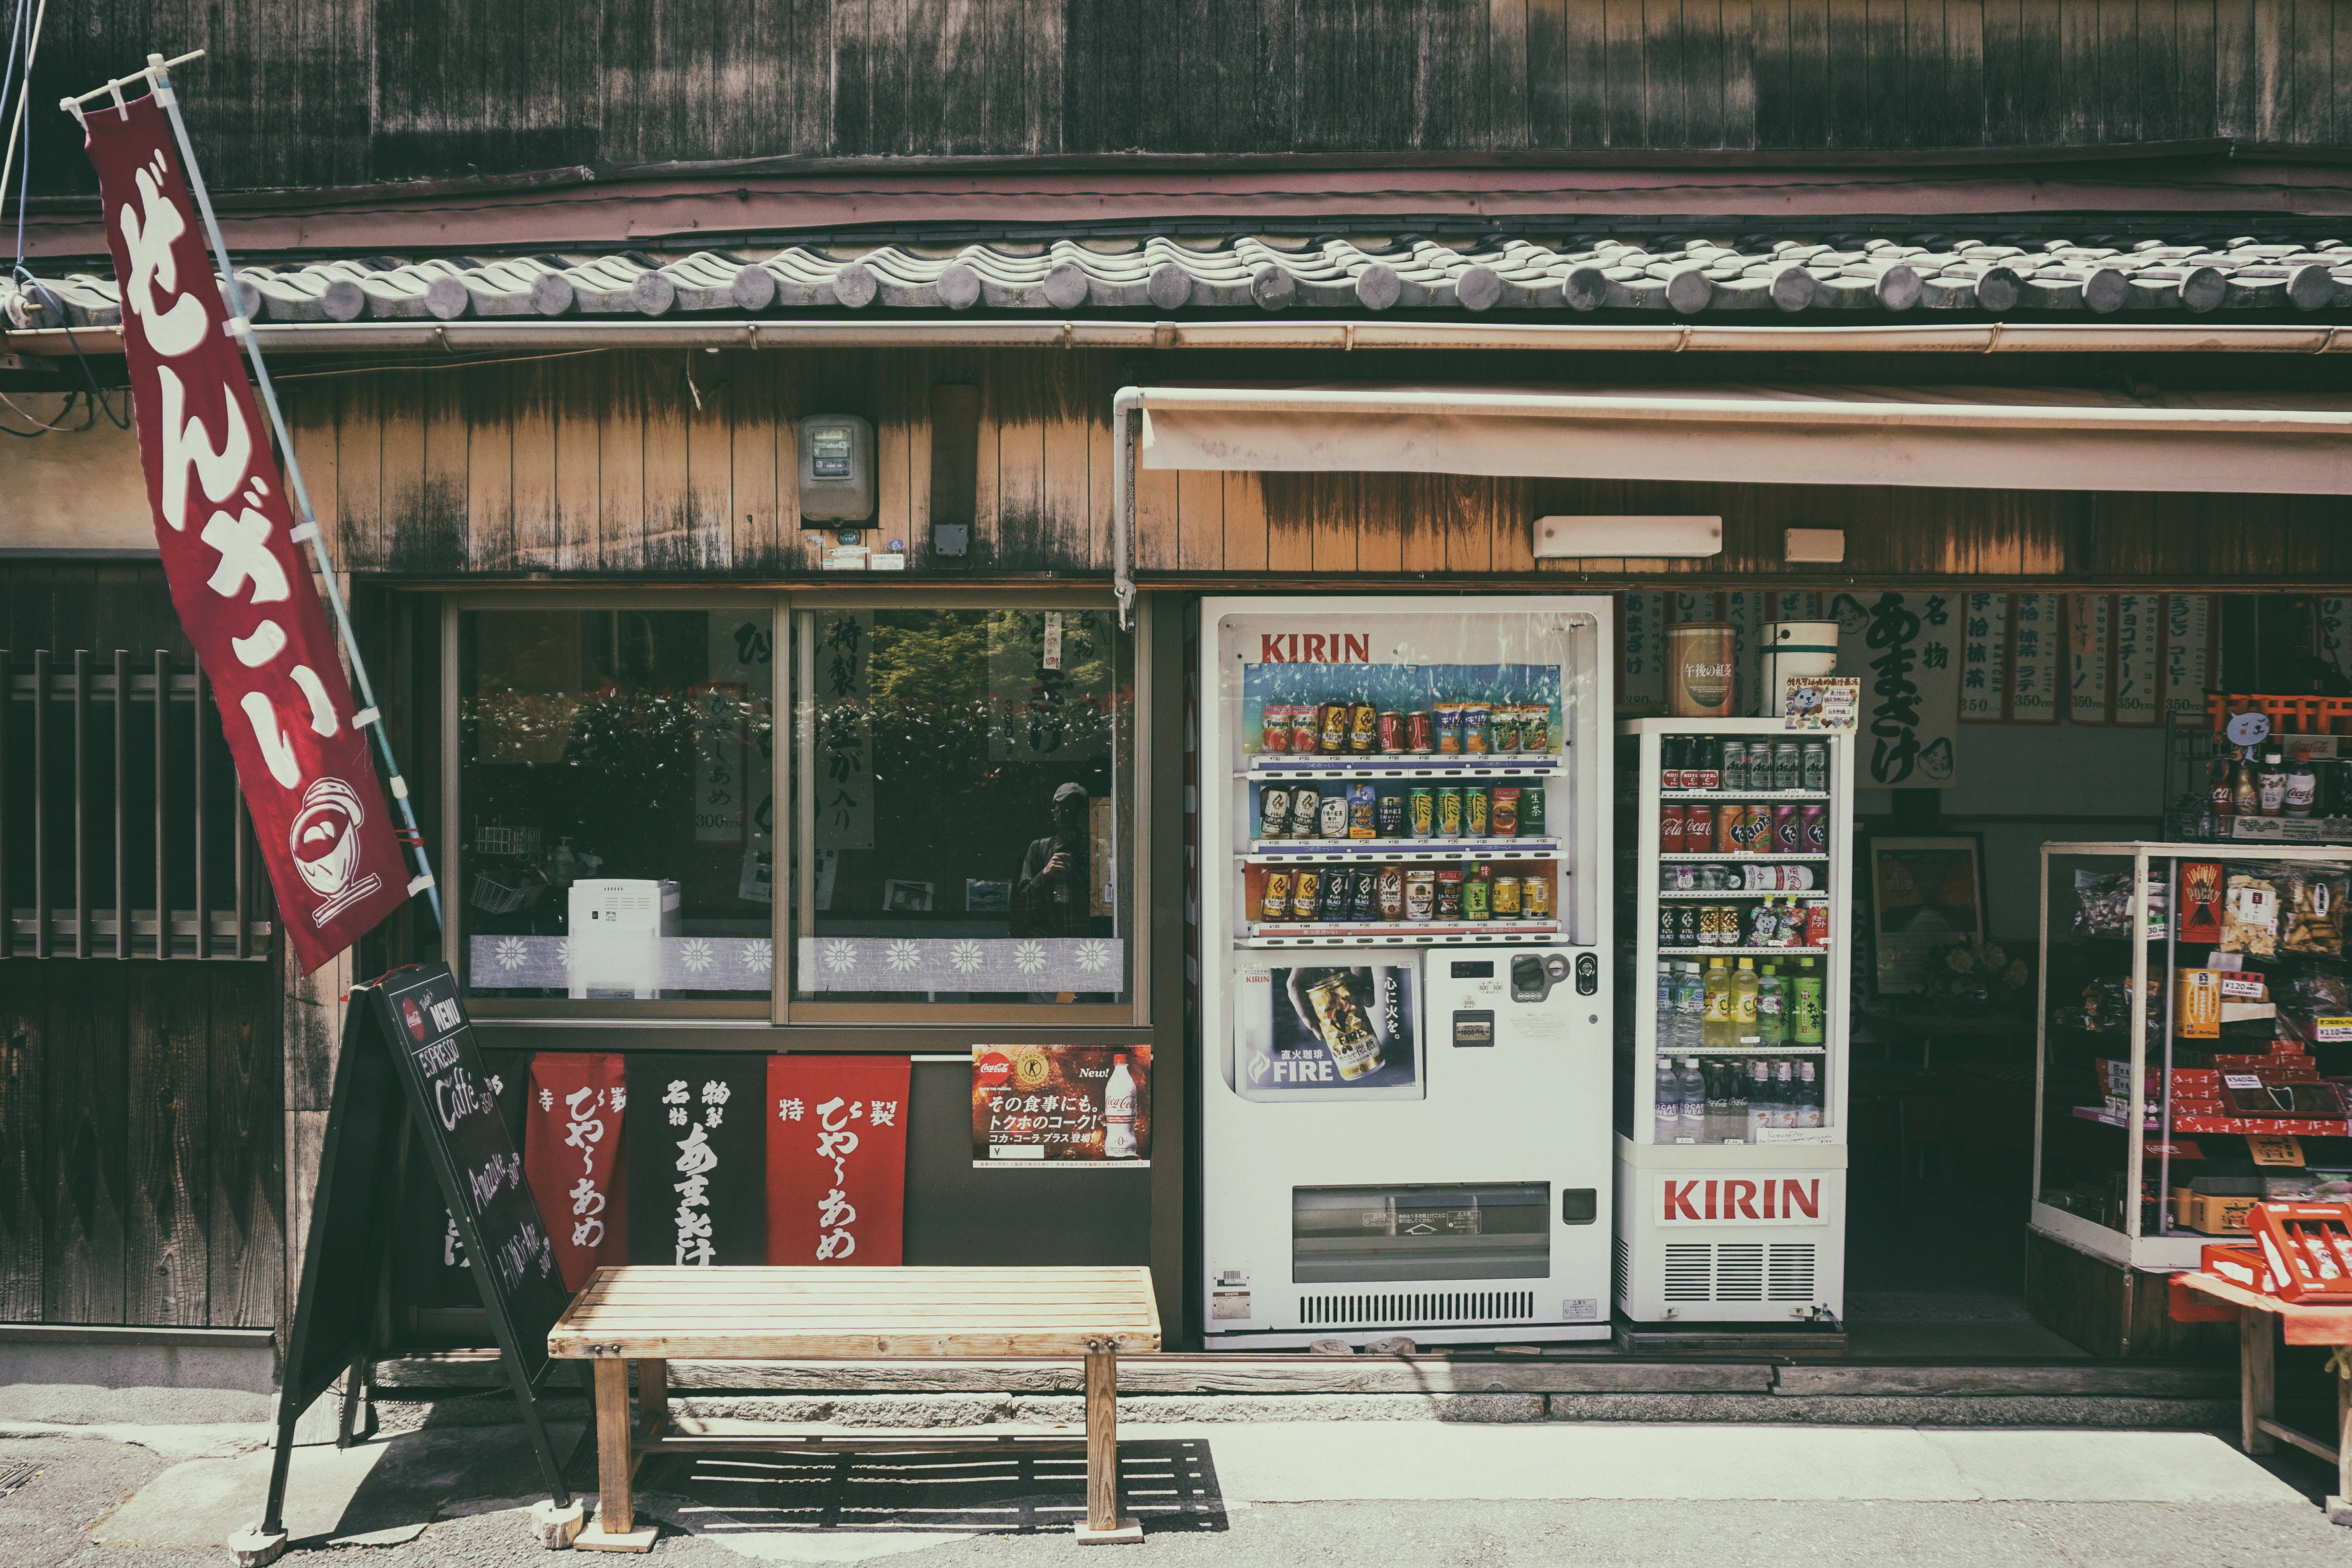 Japanese Hd Convenience Store Vending Machines Picture